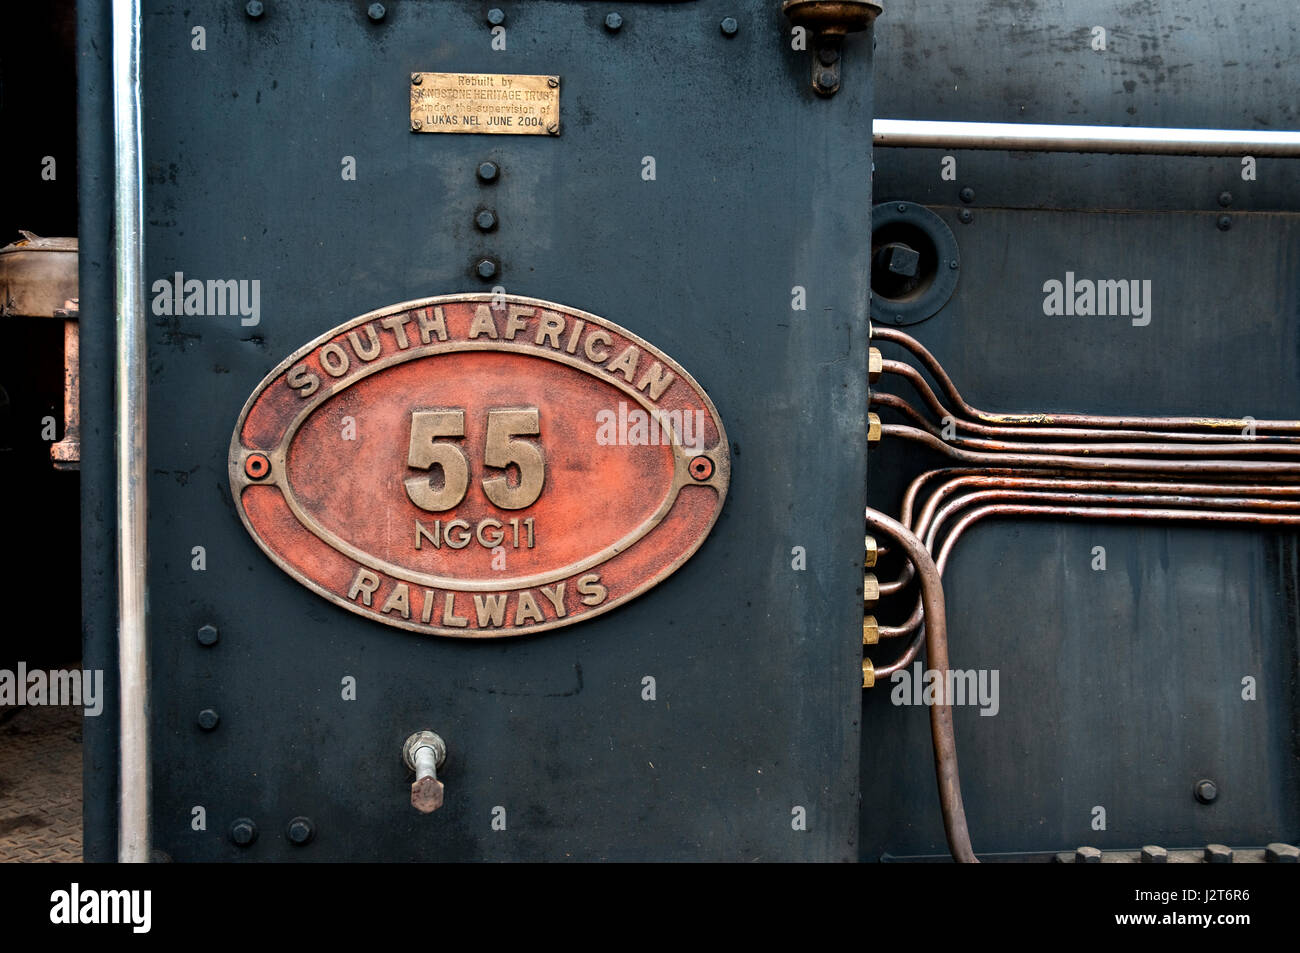 Old South African railways train manufactured in Bristol England Stock Photo